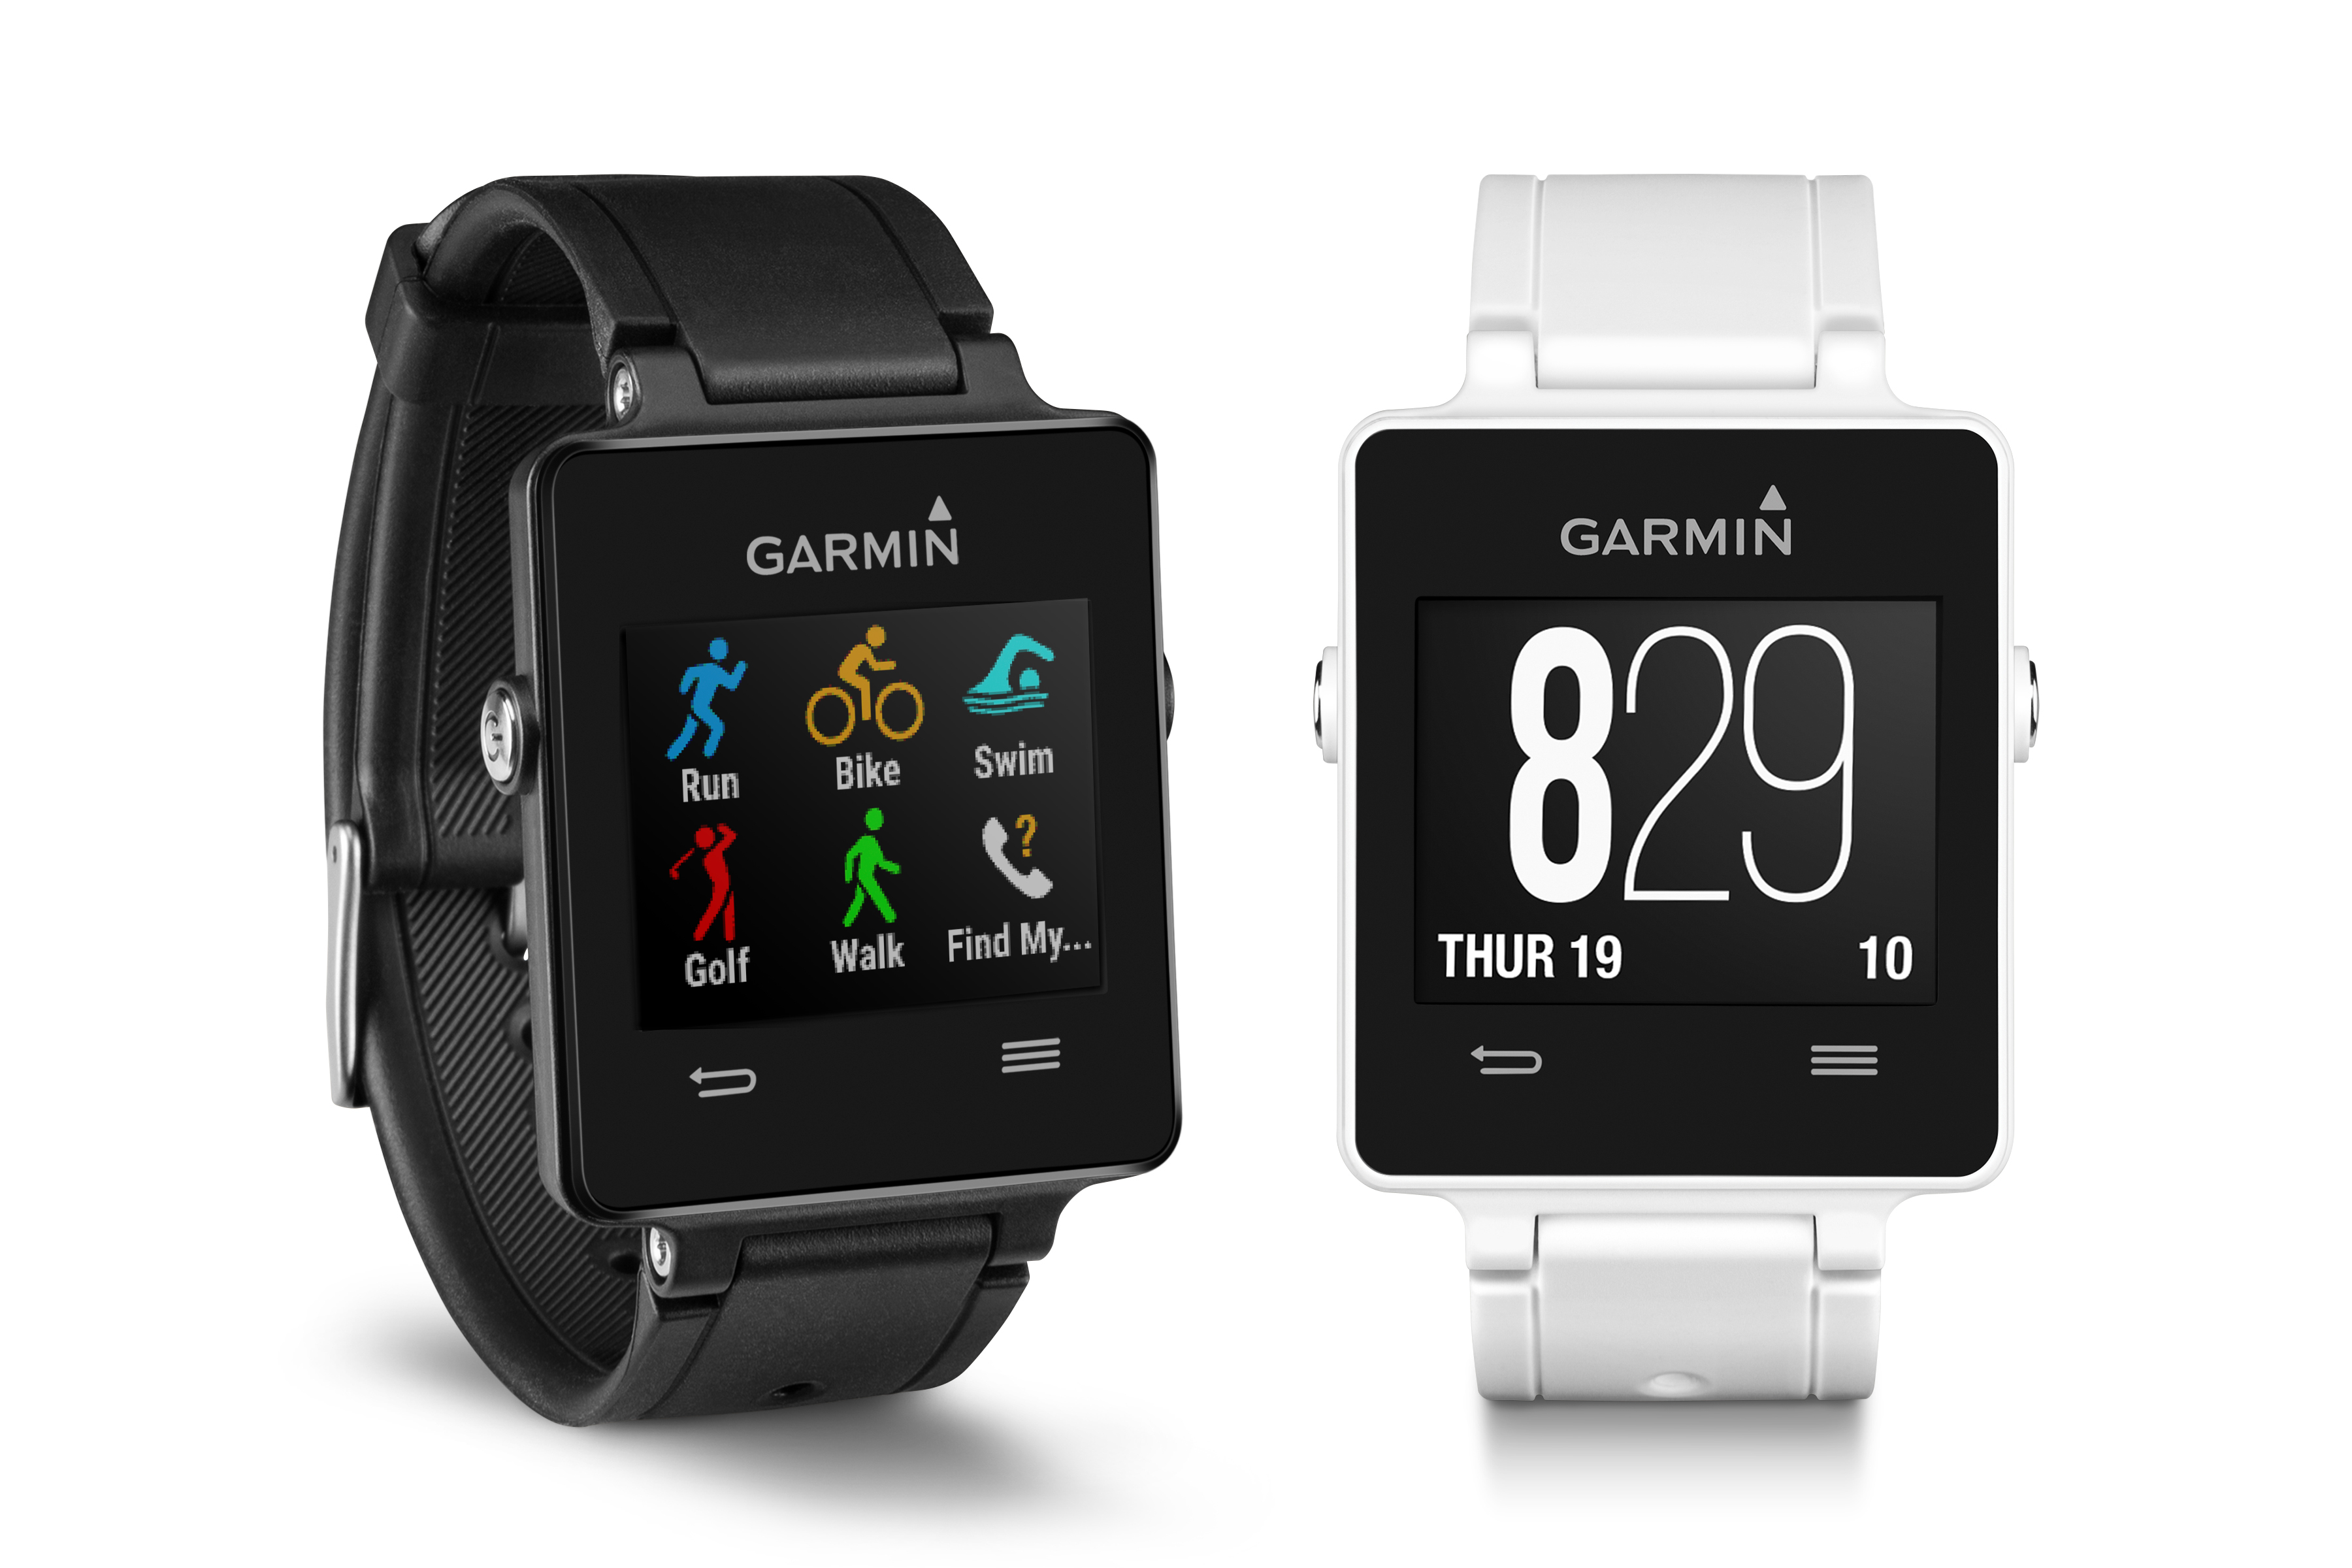 Introducing vívoactive™ – a GPS Smartwatch for the Active Lifestyle